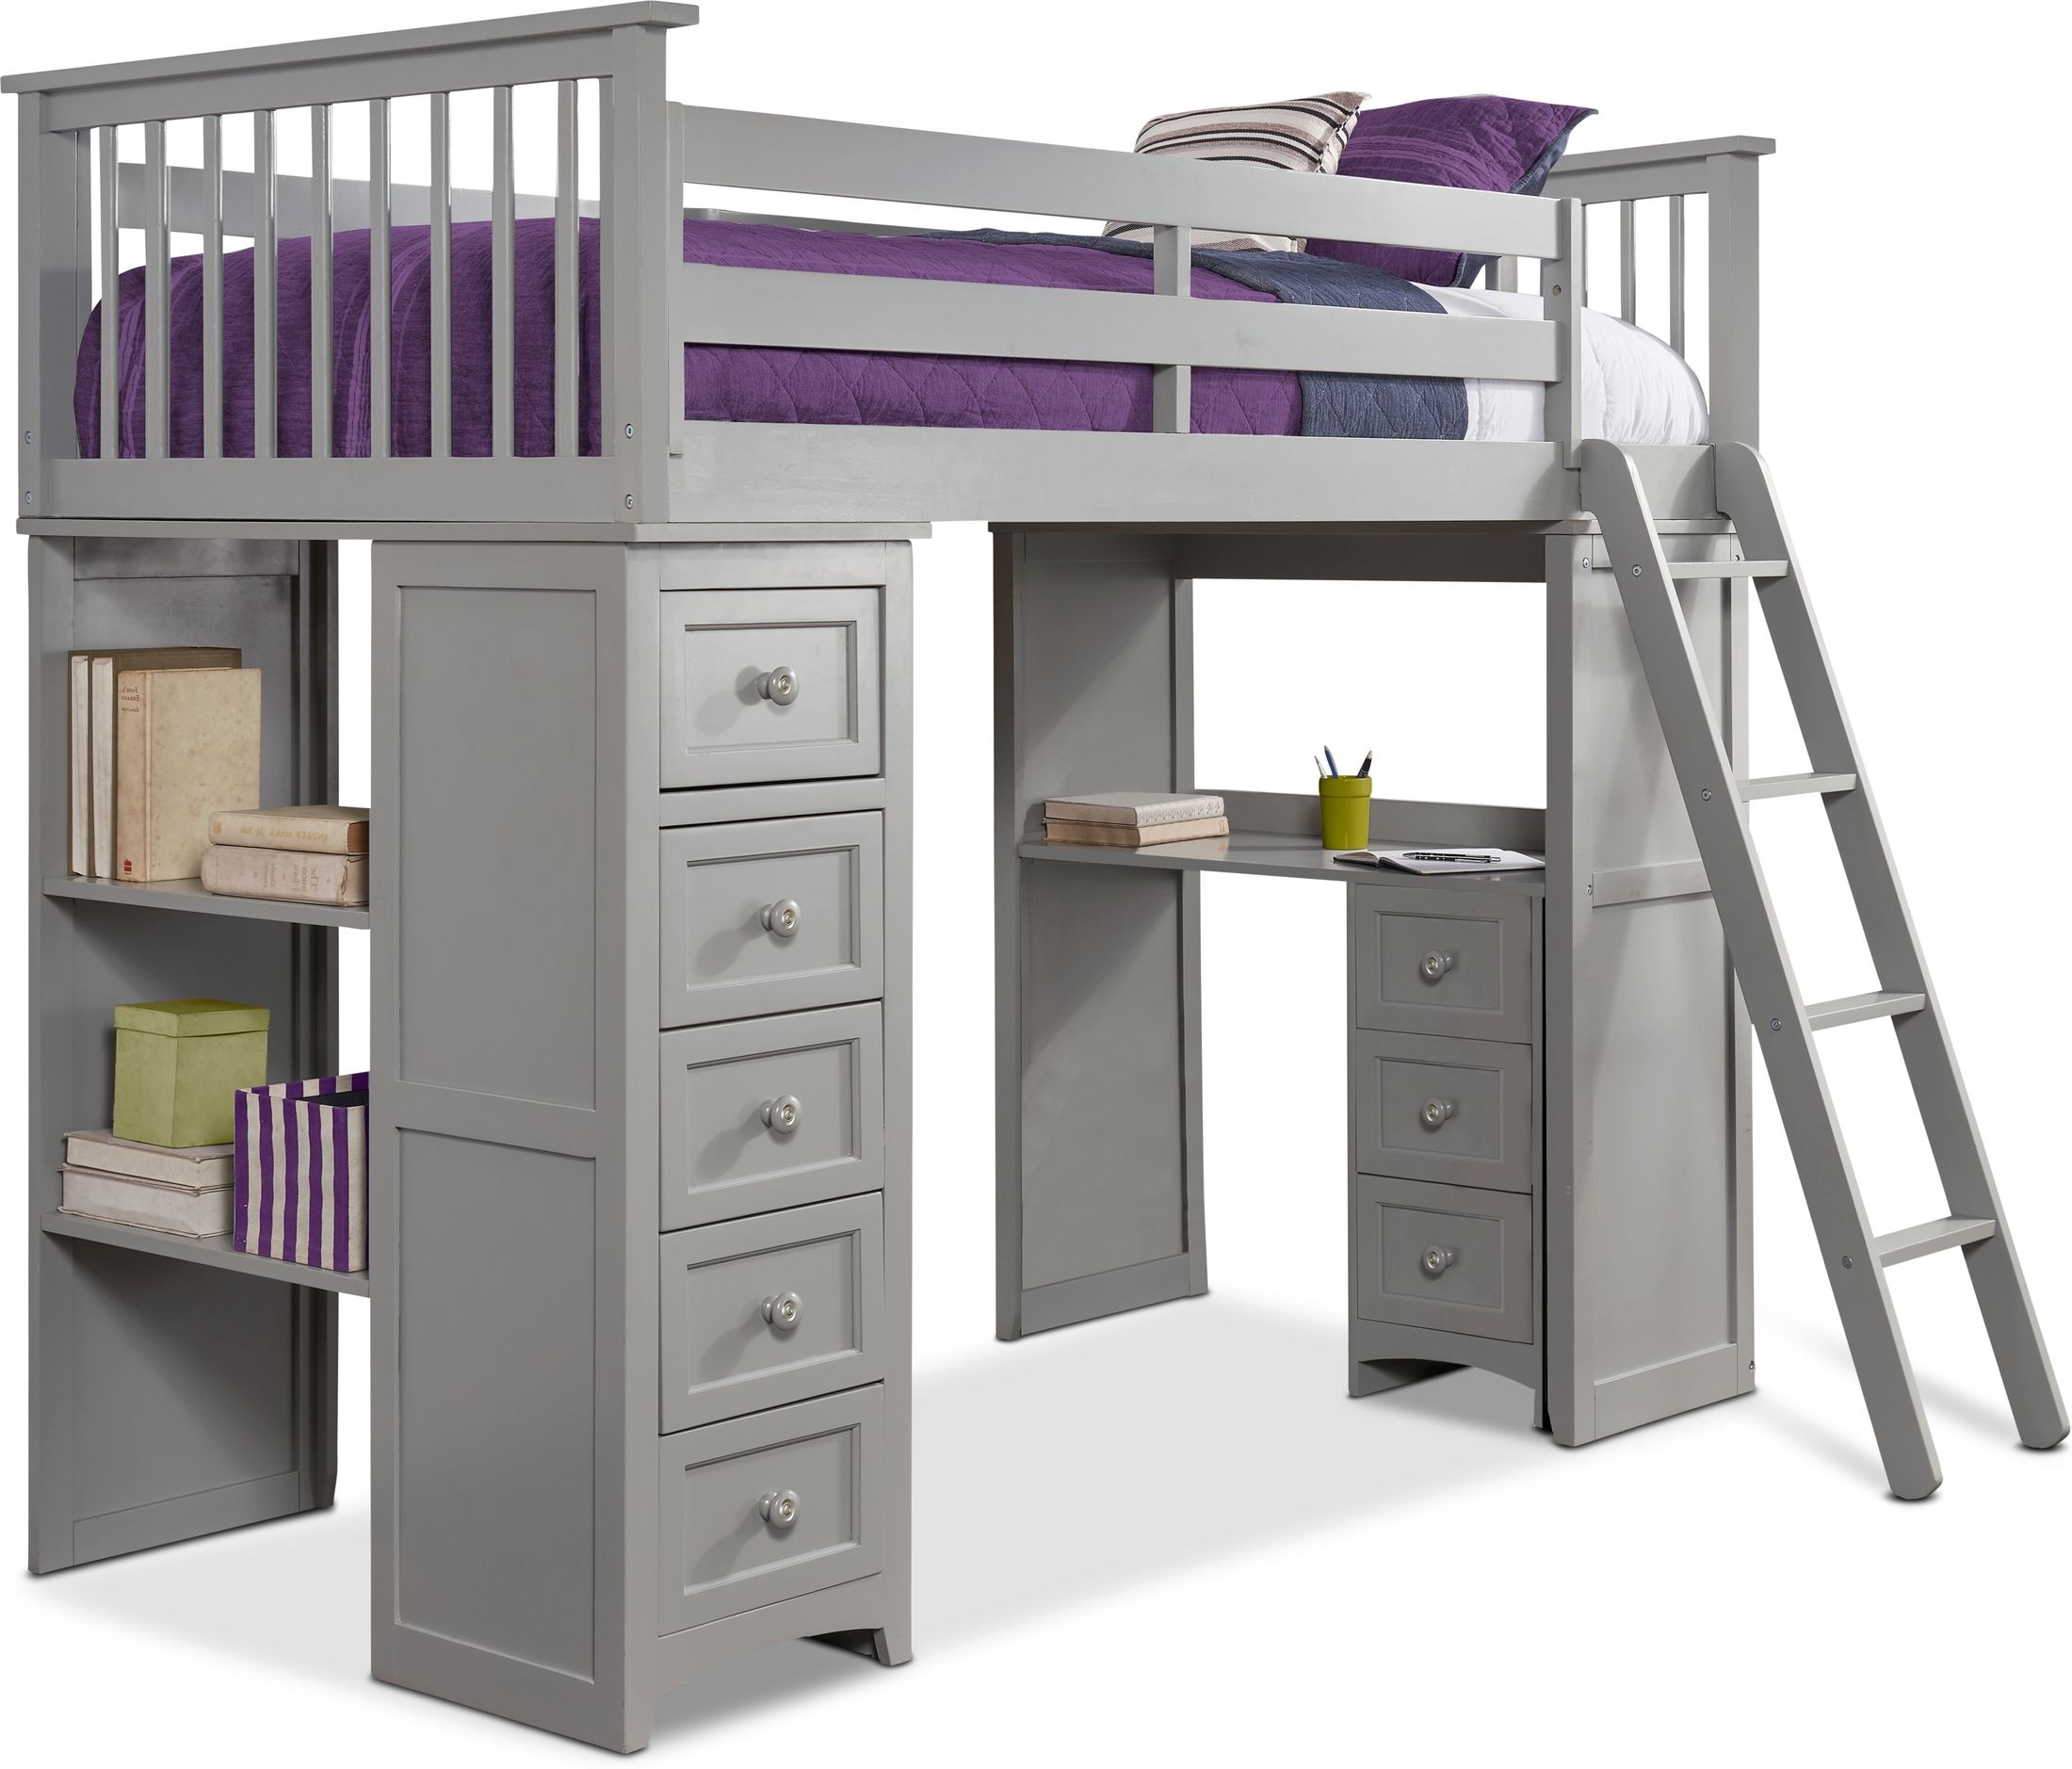 Bunk Beds Value City, Value City Bunk Beds With Stairs